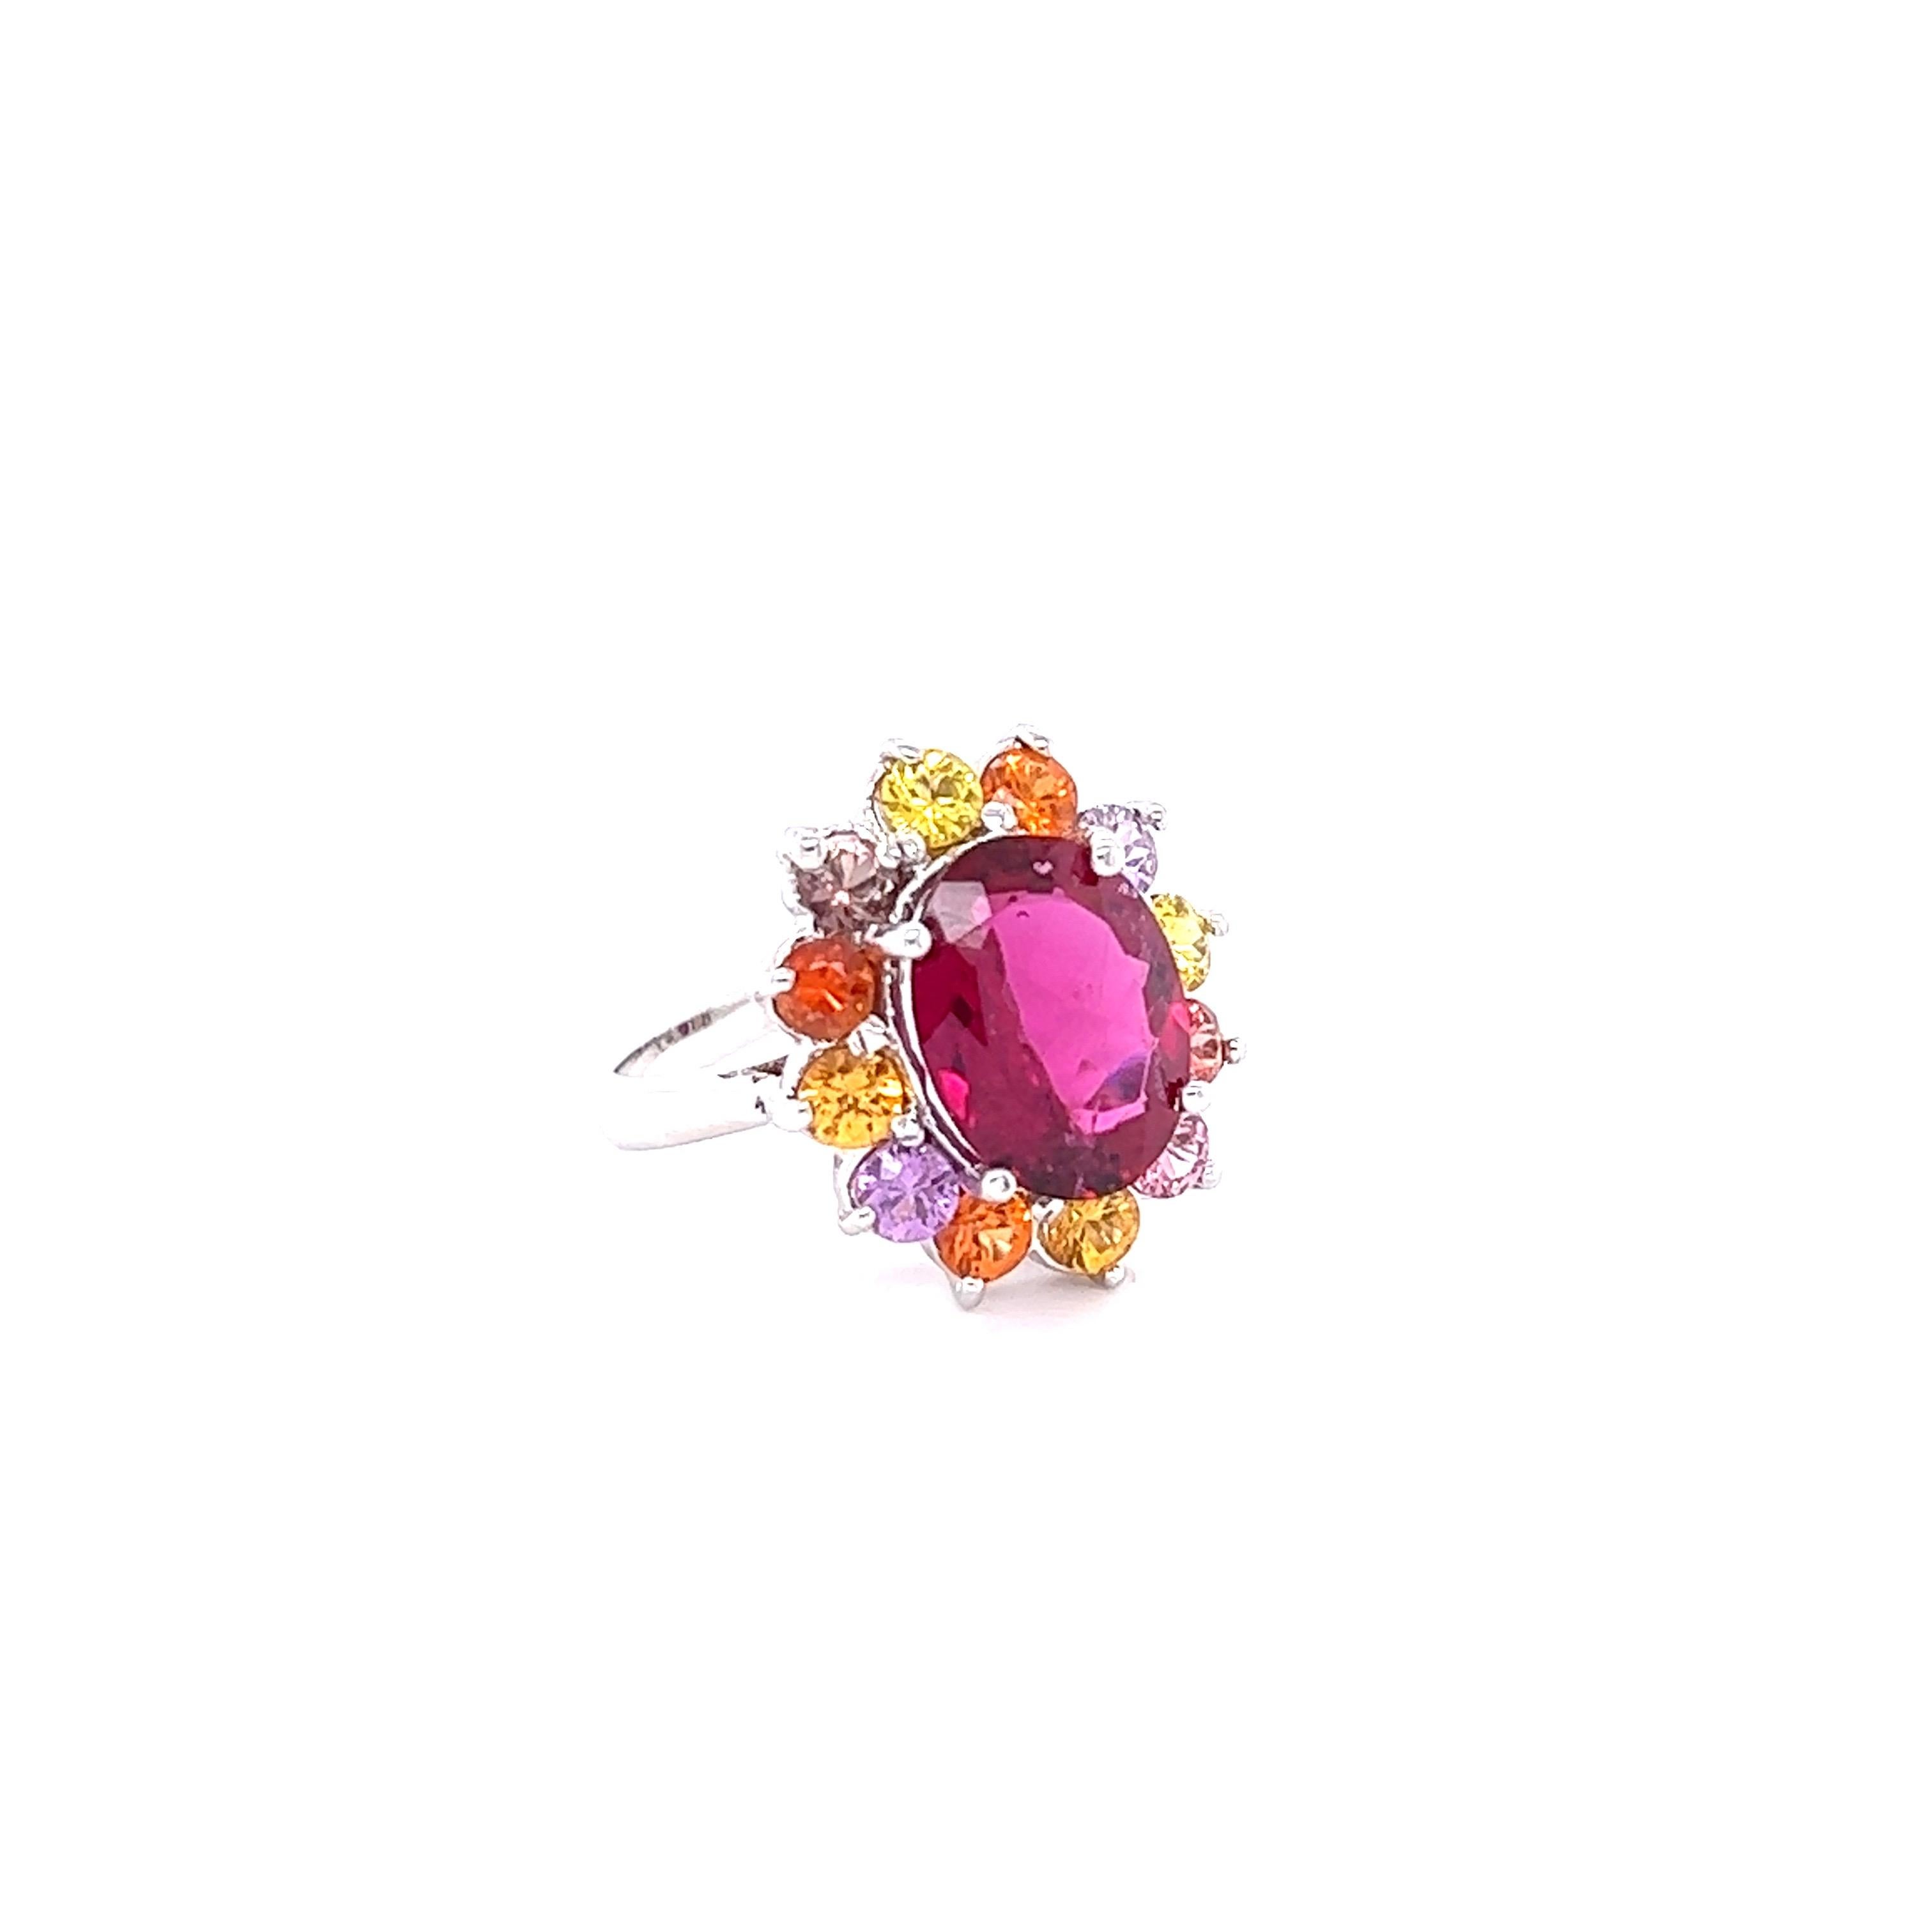 This ring has a 4.23 carat Oval Cut Hot Pink Tourmaline (Rubellite) and is elegantly surrounded by 12 Round Cut Multi-Colored Sapphires that weigh 2.30 carats. The total carat weight of this ring is 6.53 carats.

The tourmaline measures at